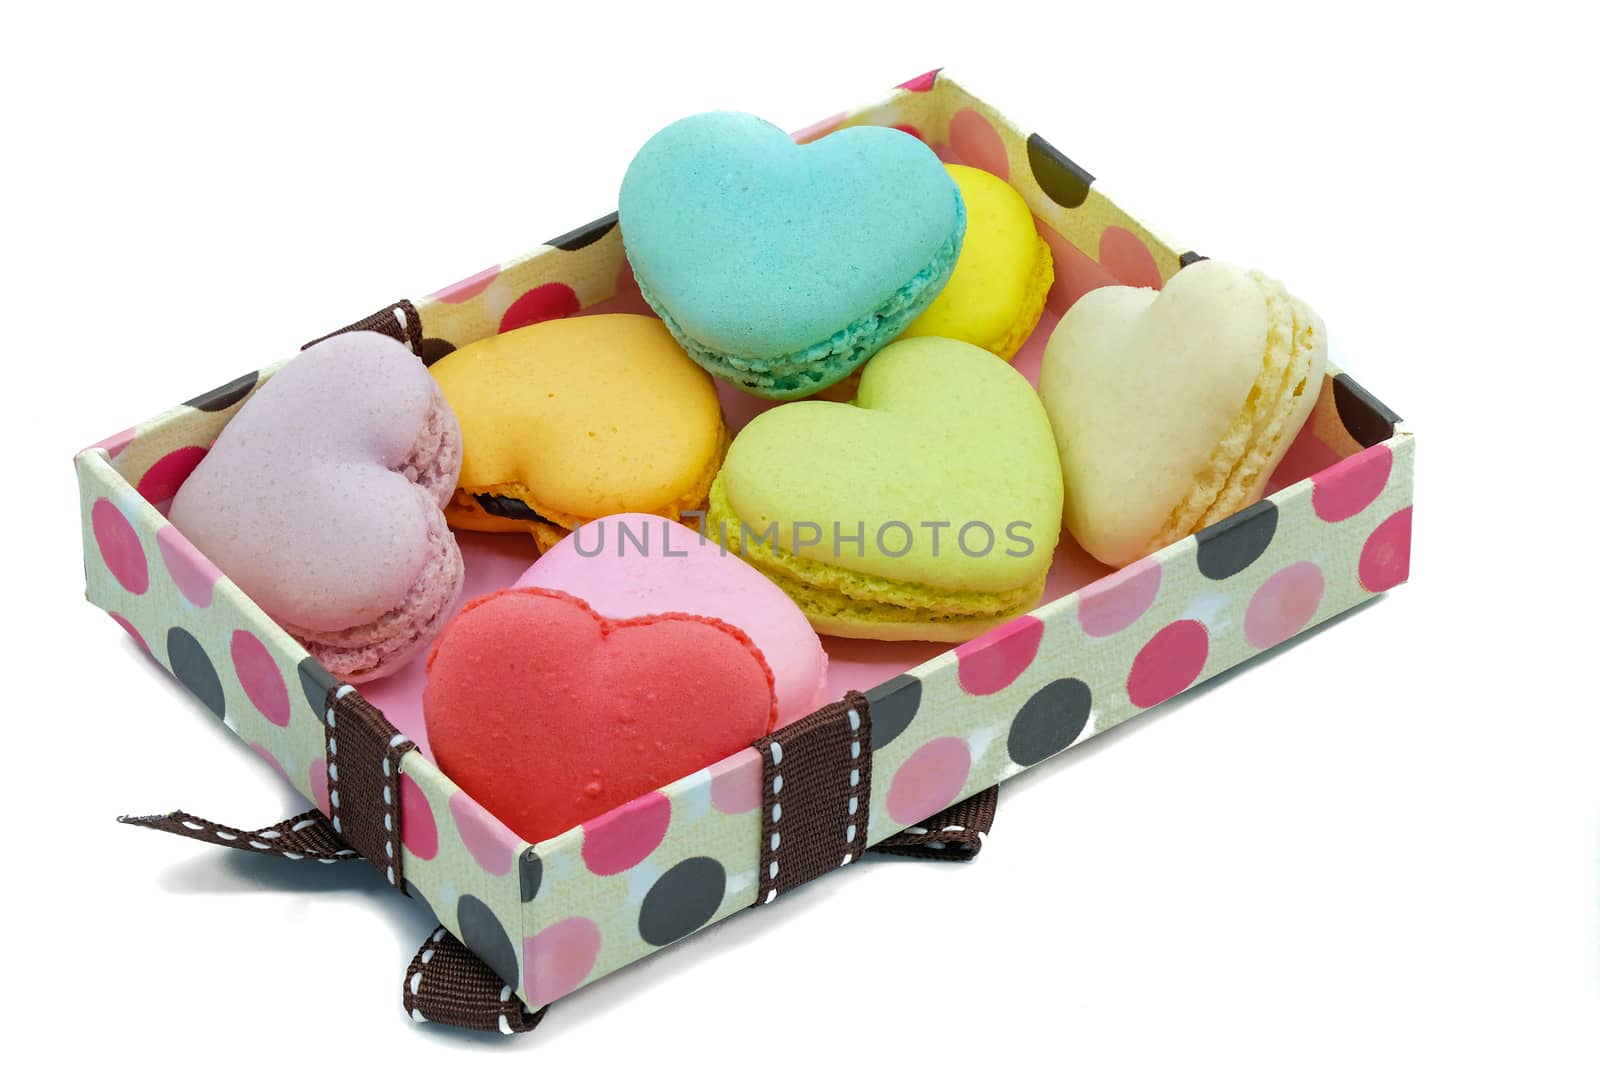 assortments of pastel color macaroons by Nawoot